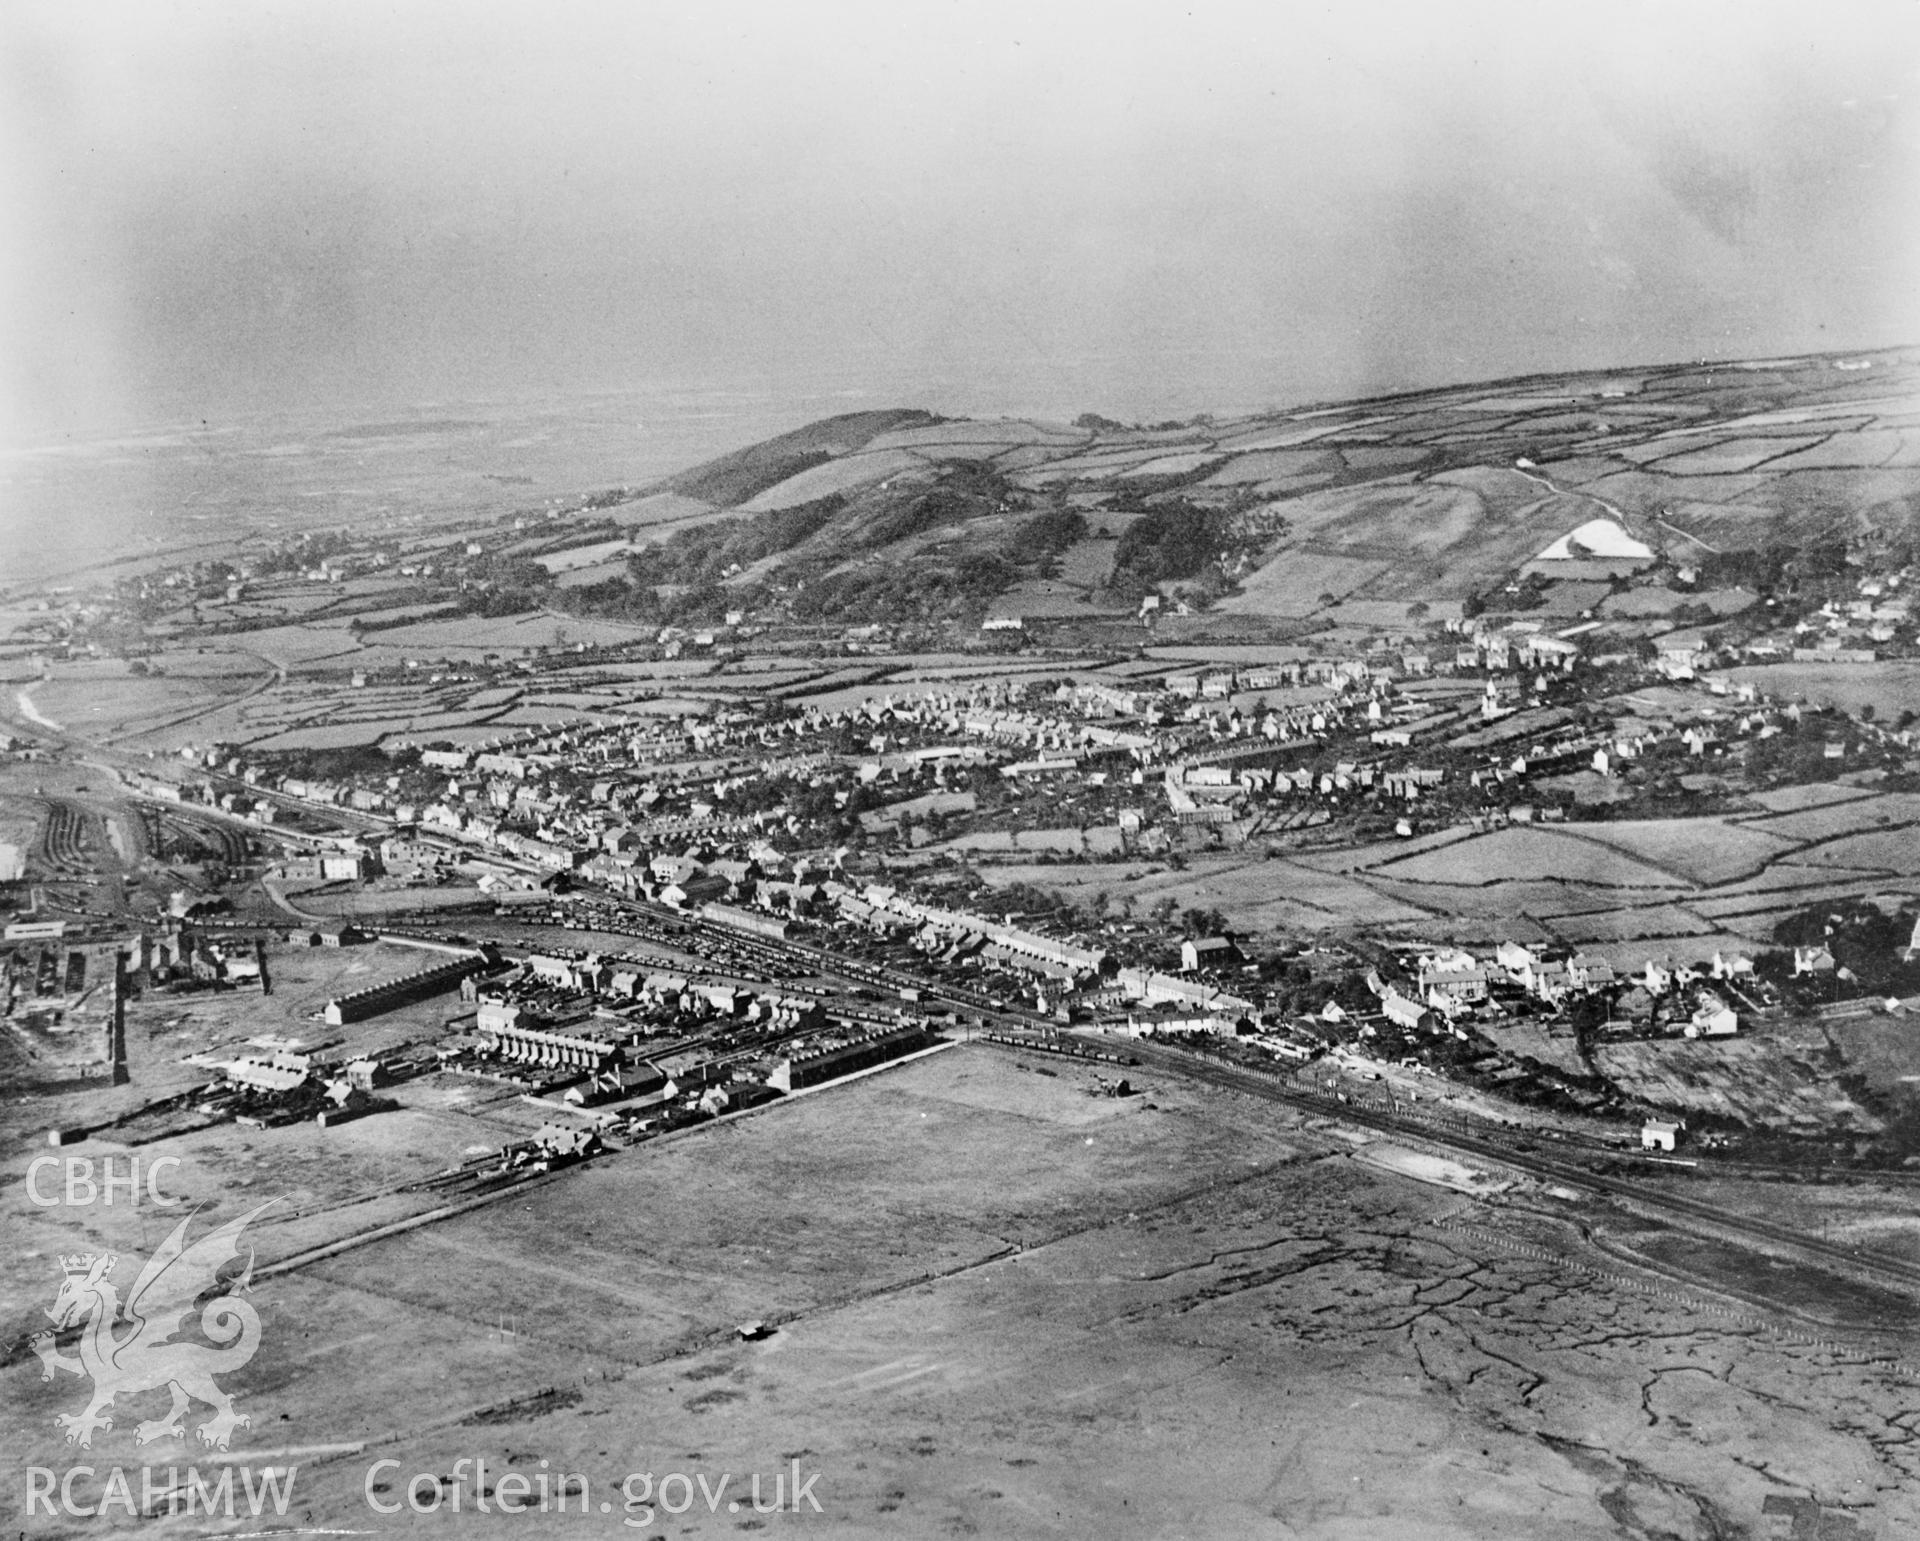 General view of Burry Port. Oblique aerial photograph, 5?x4? BW glass plate.